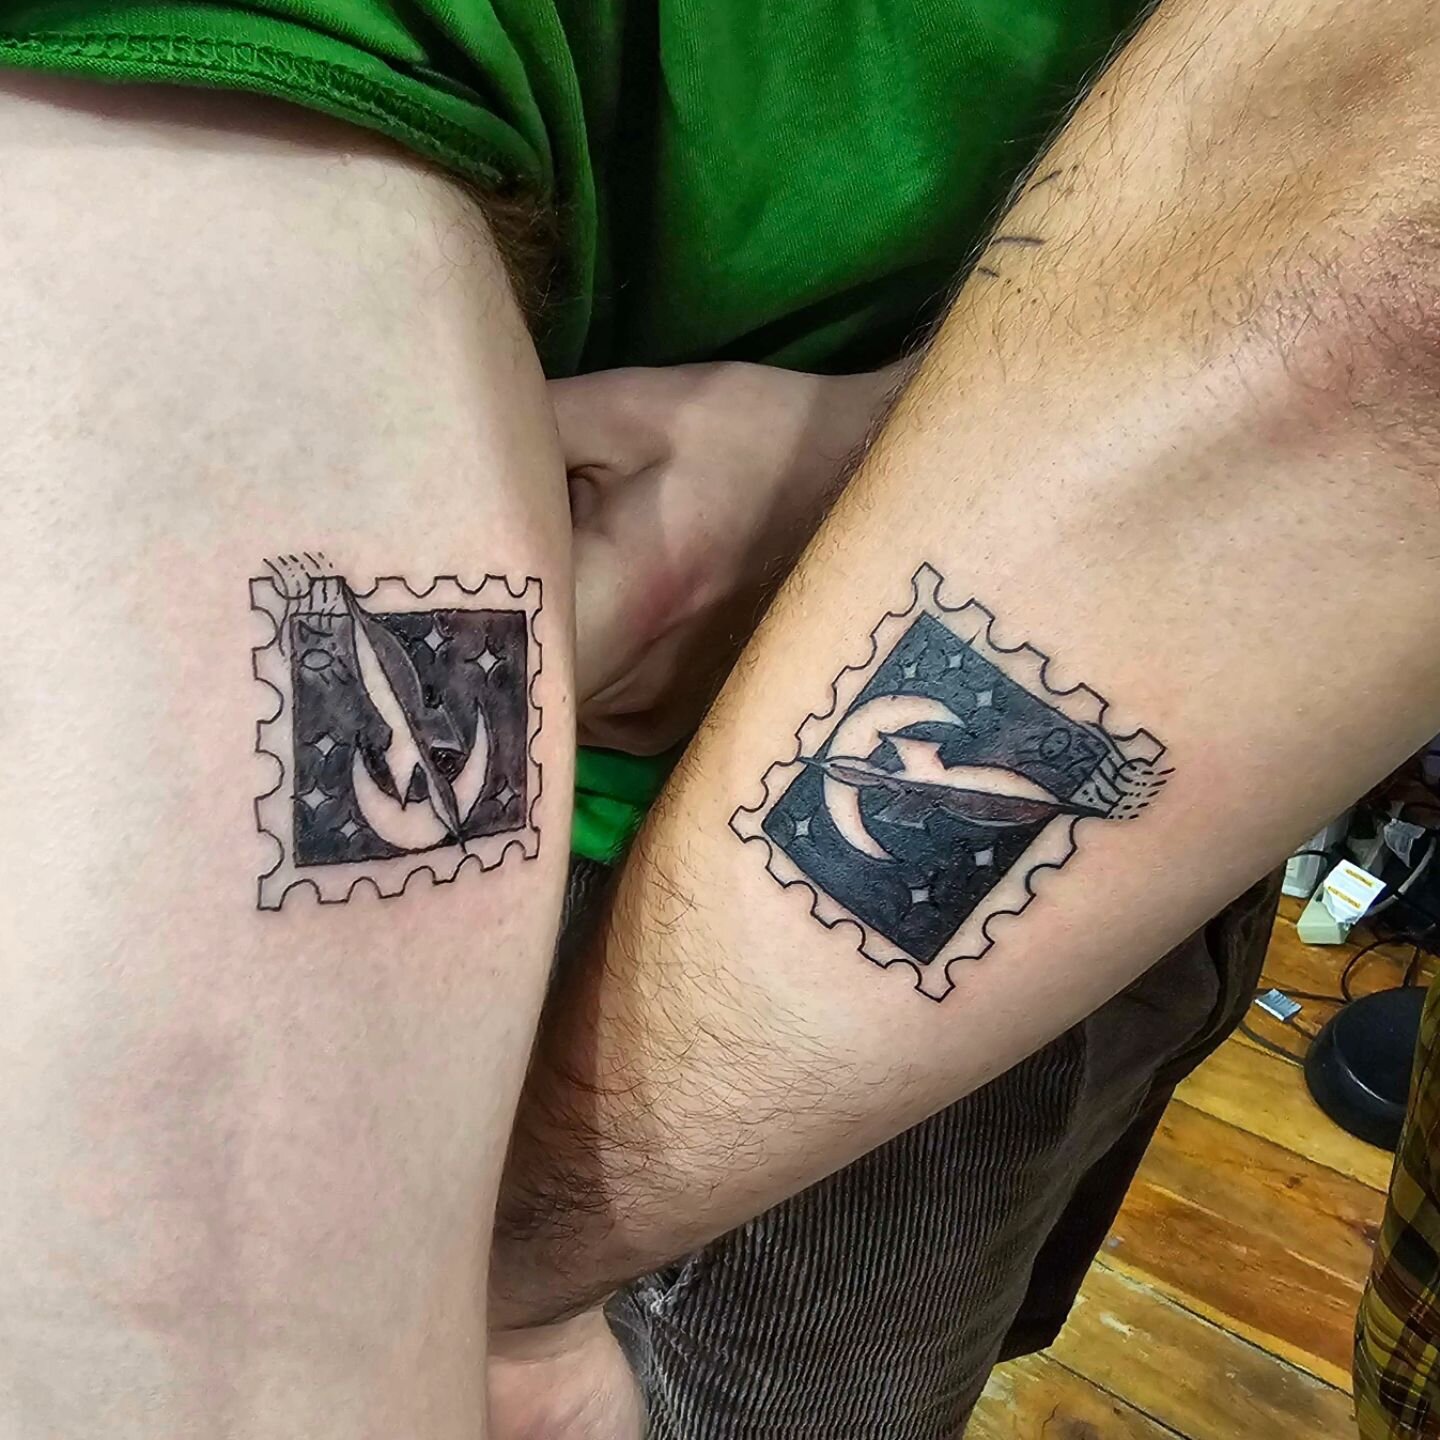 Matching tattoos for lifelong friends. Done with @mystic_hare_artz (:

Come see us at @robotpiercingtattoo and we can get something cool started!

#matchingtattoos #friendshiptattoos #friendshiptattoo #portlandart #pdxtattooers